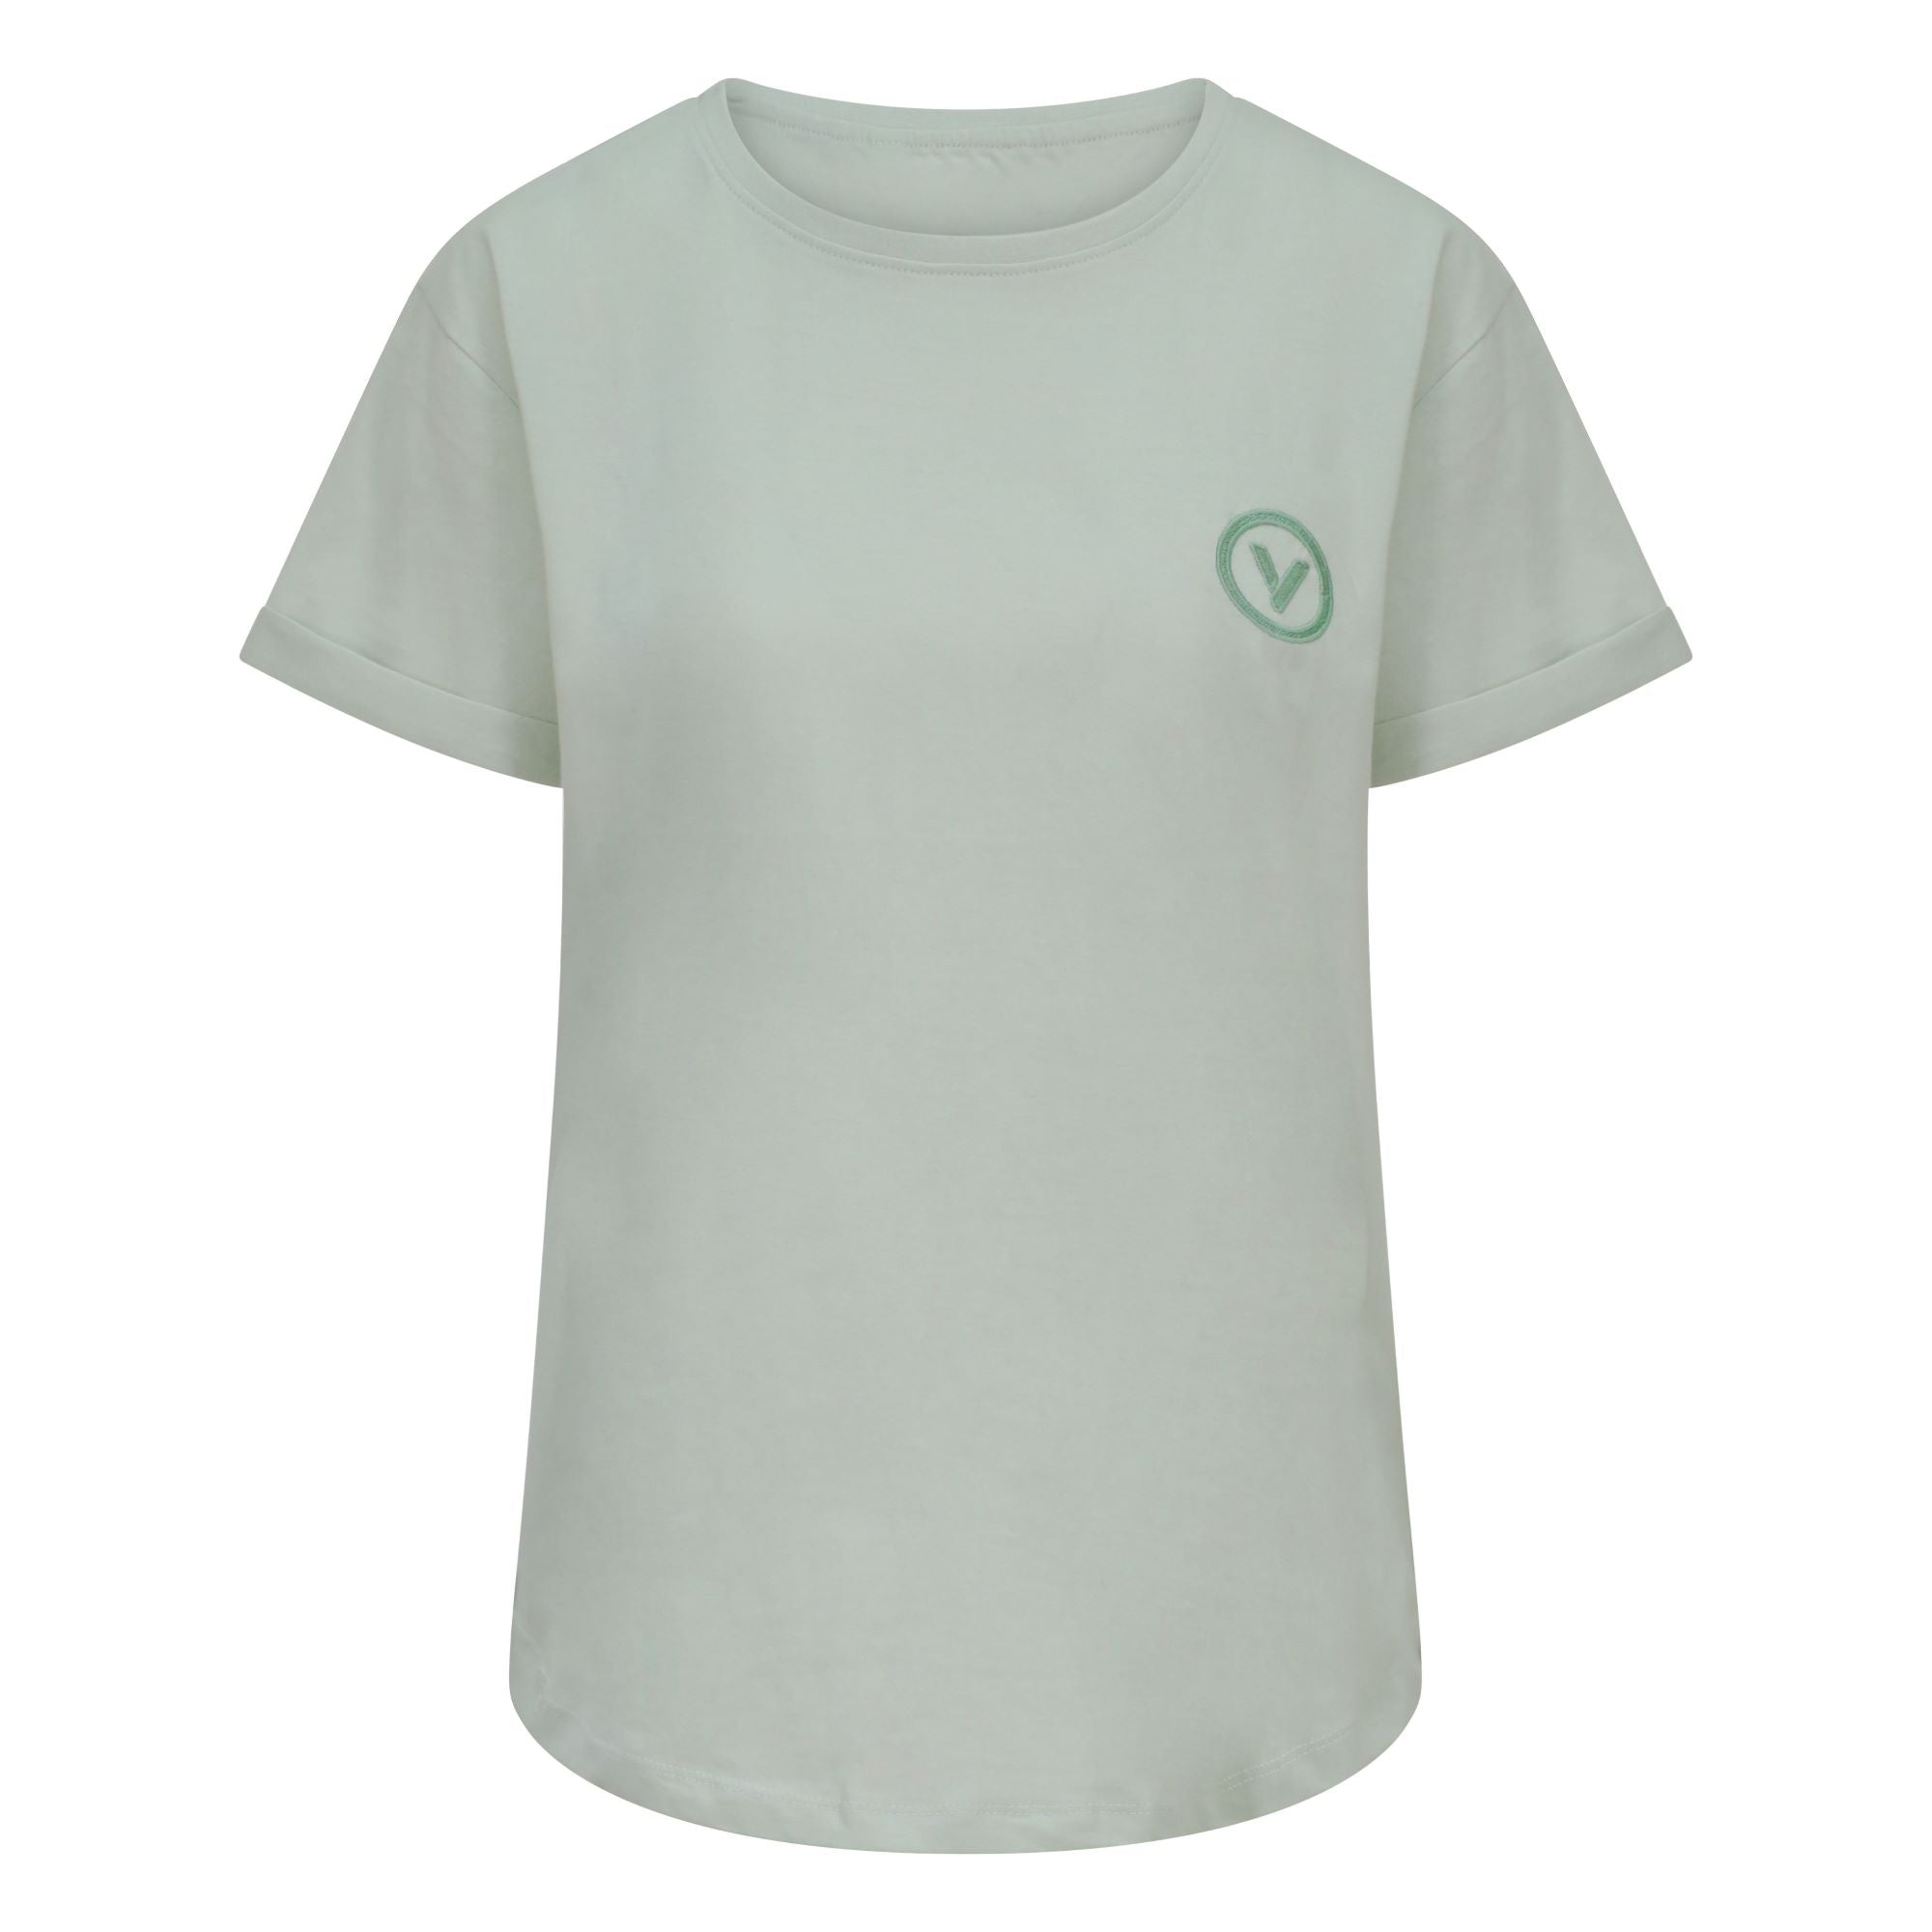 Validate Core Essentials Women's Rolled Sleeve  TShirt Muted Green